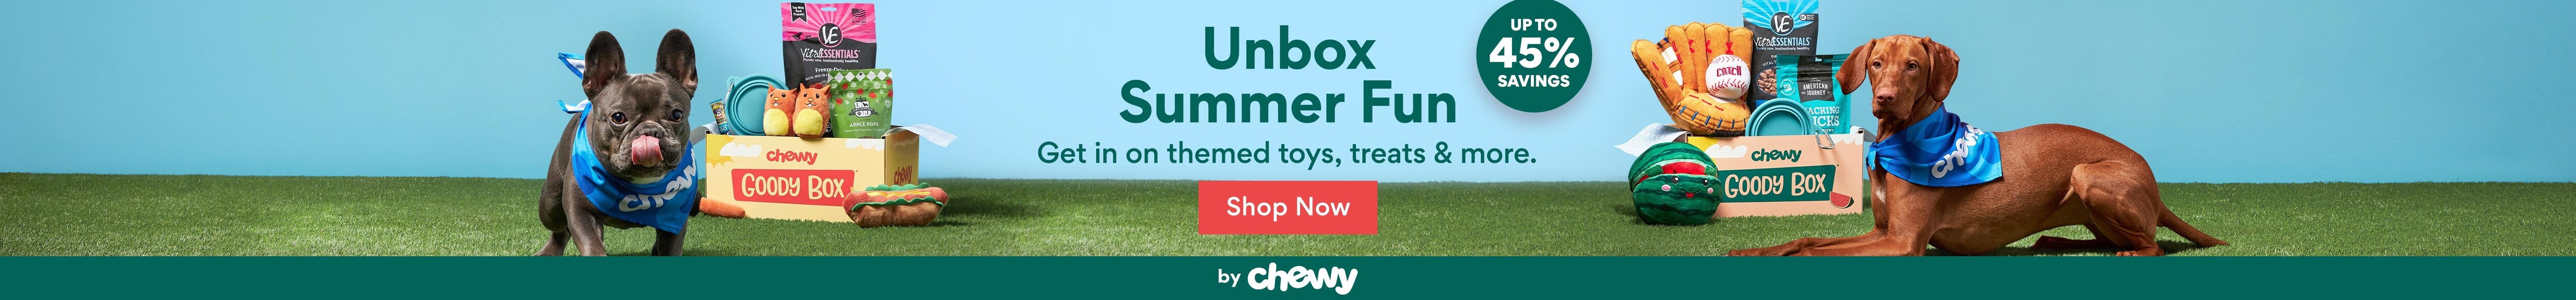 Up to 45% savings. Unbox Summer Fun. Get in on themed toys, treats & more. By Chewy.